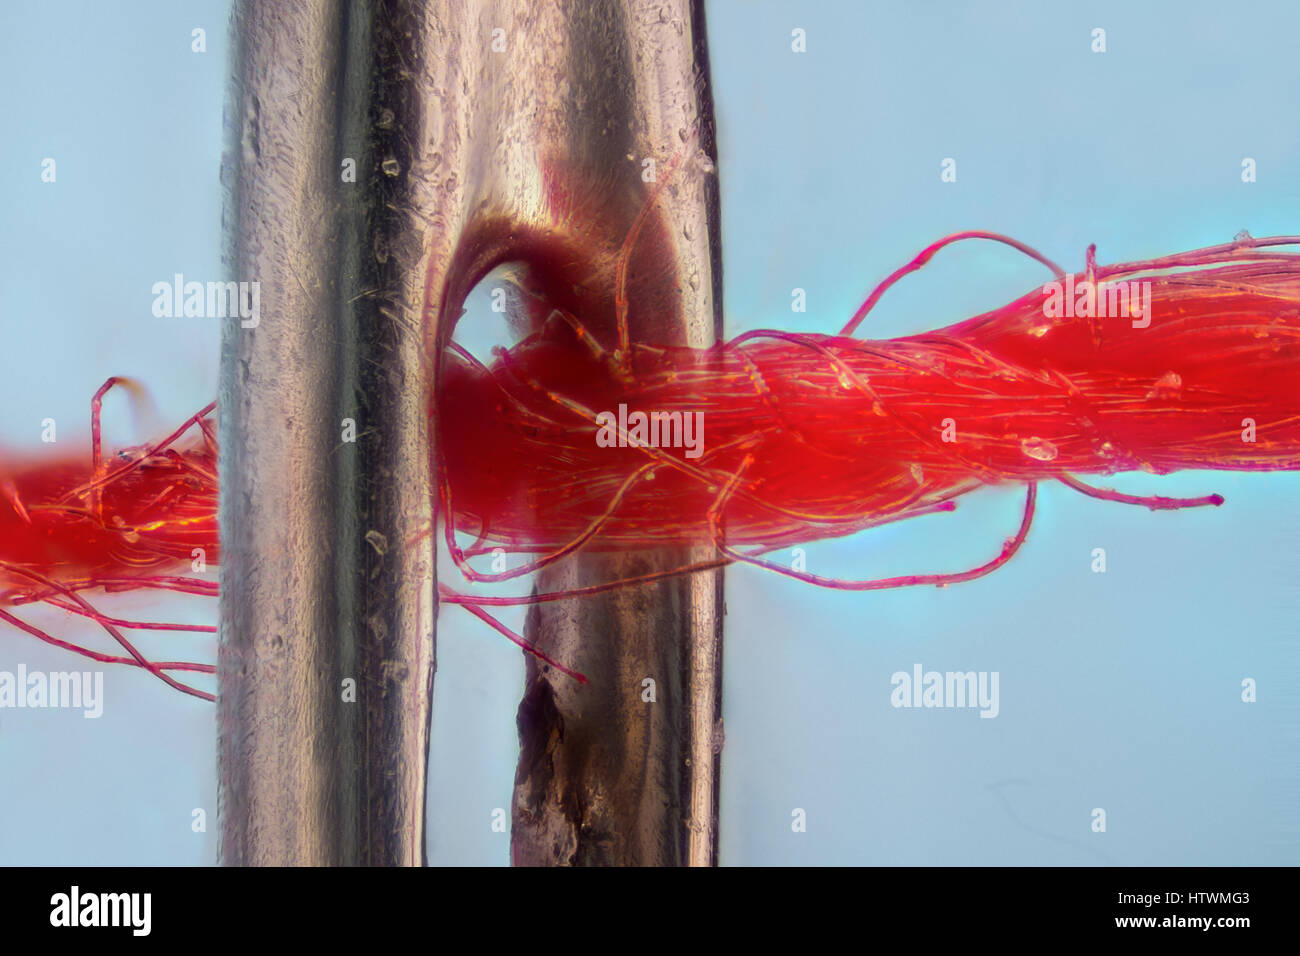 Extreme magnification - Needle with red thread Stock Photo